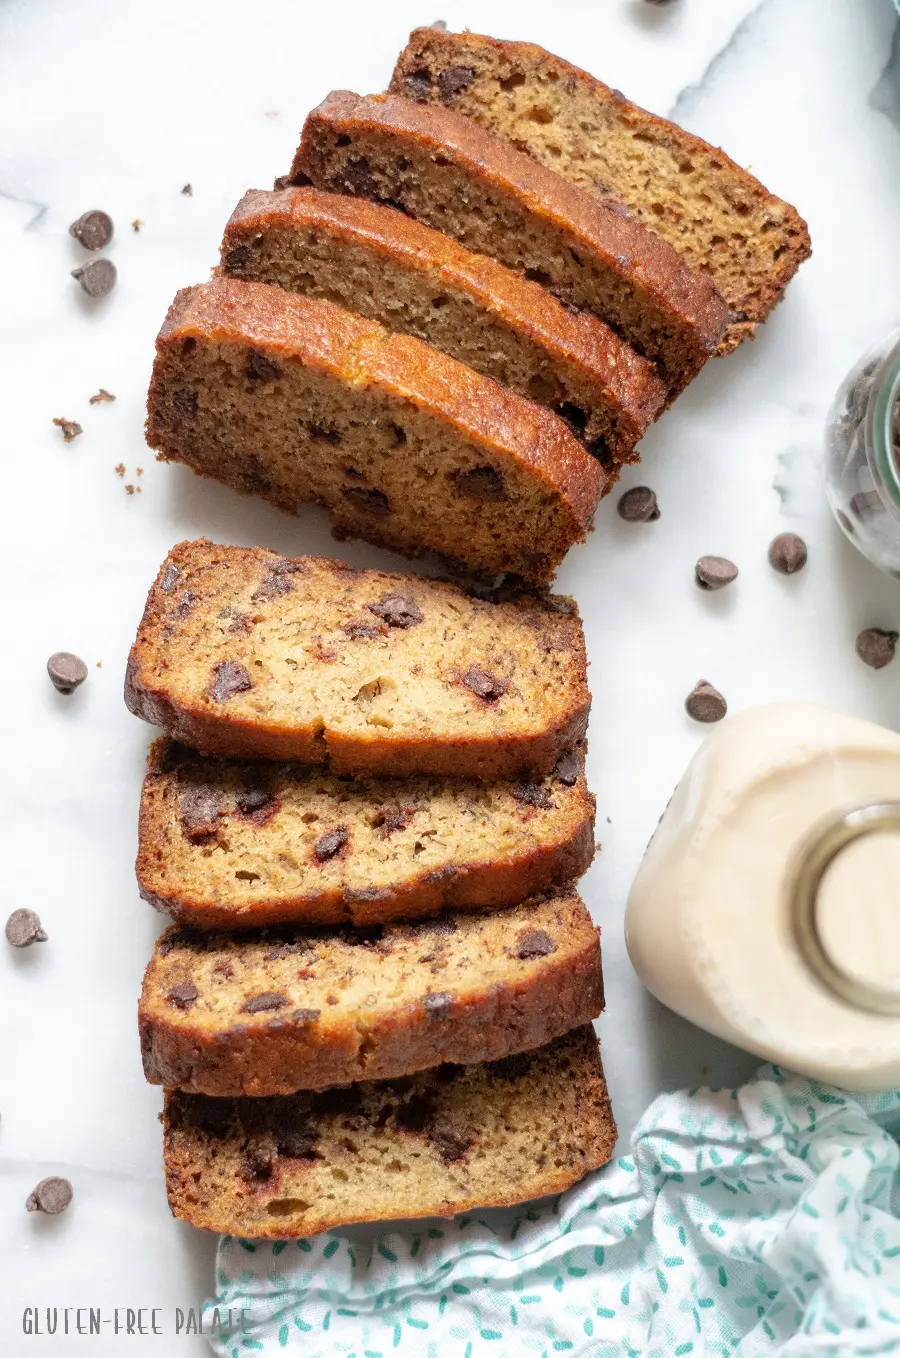 slices of Gluten-Free Banana Bread with chocolate chips next to a glass of milk